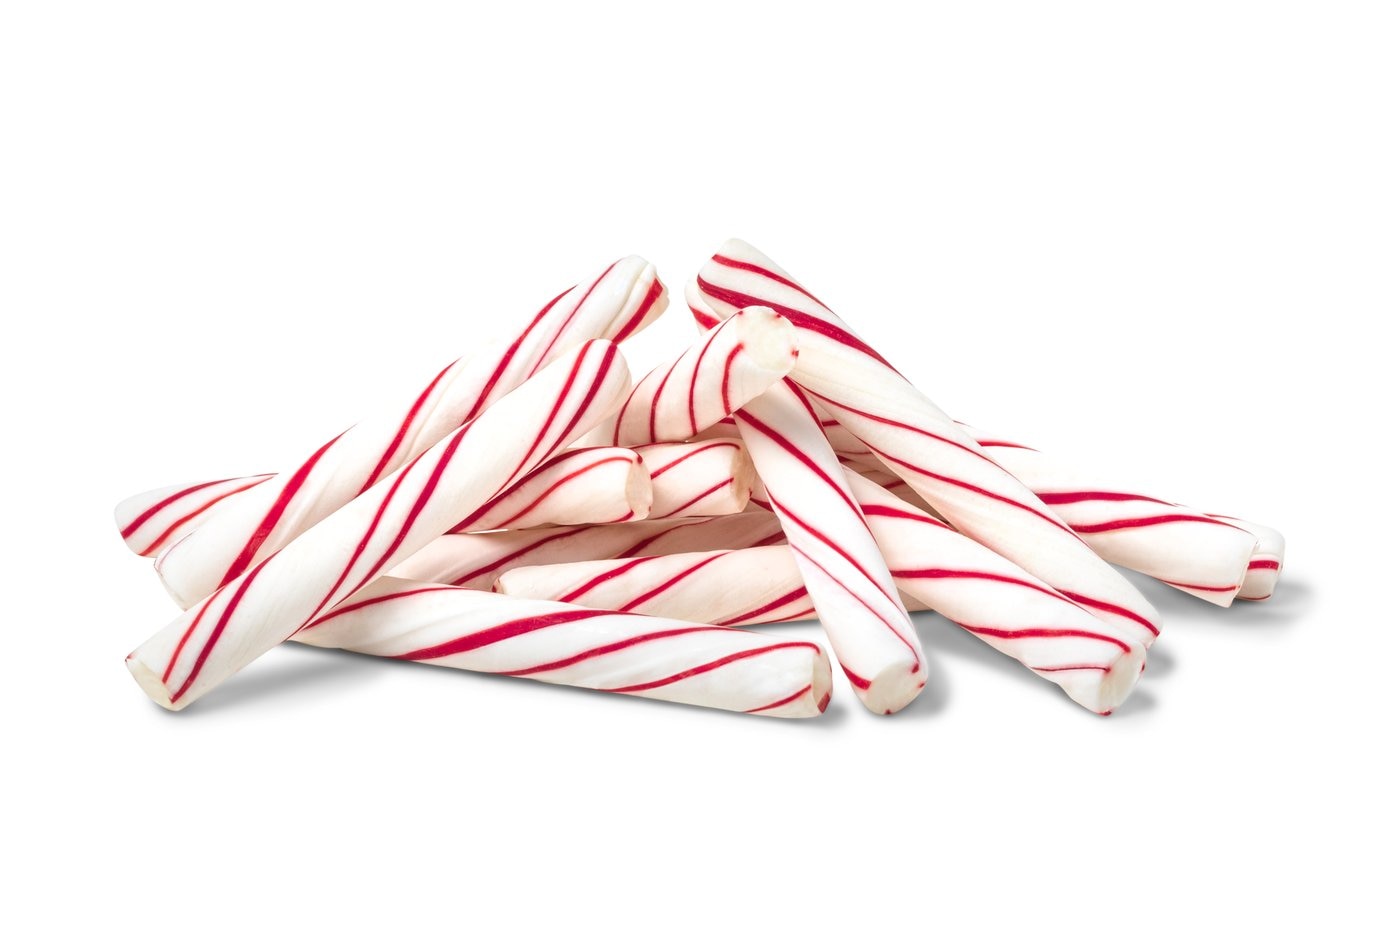 Peppermint Sticks image zoom